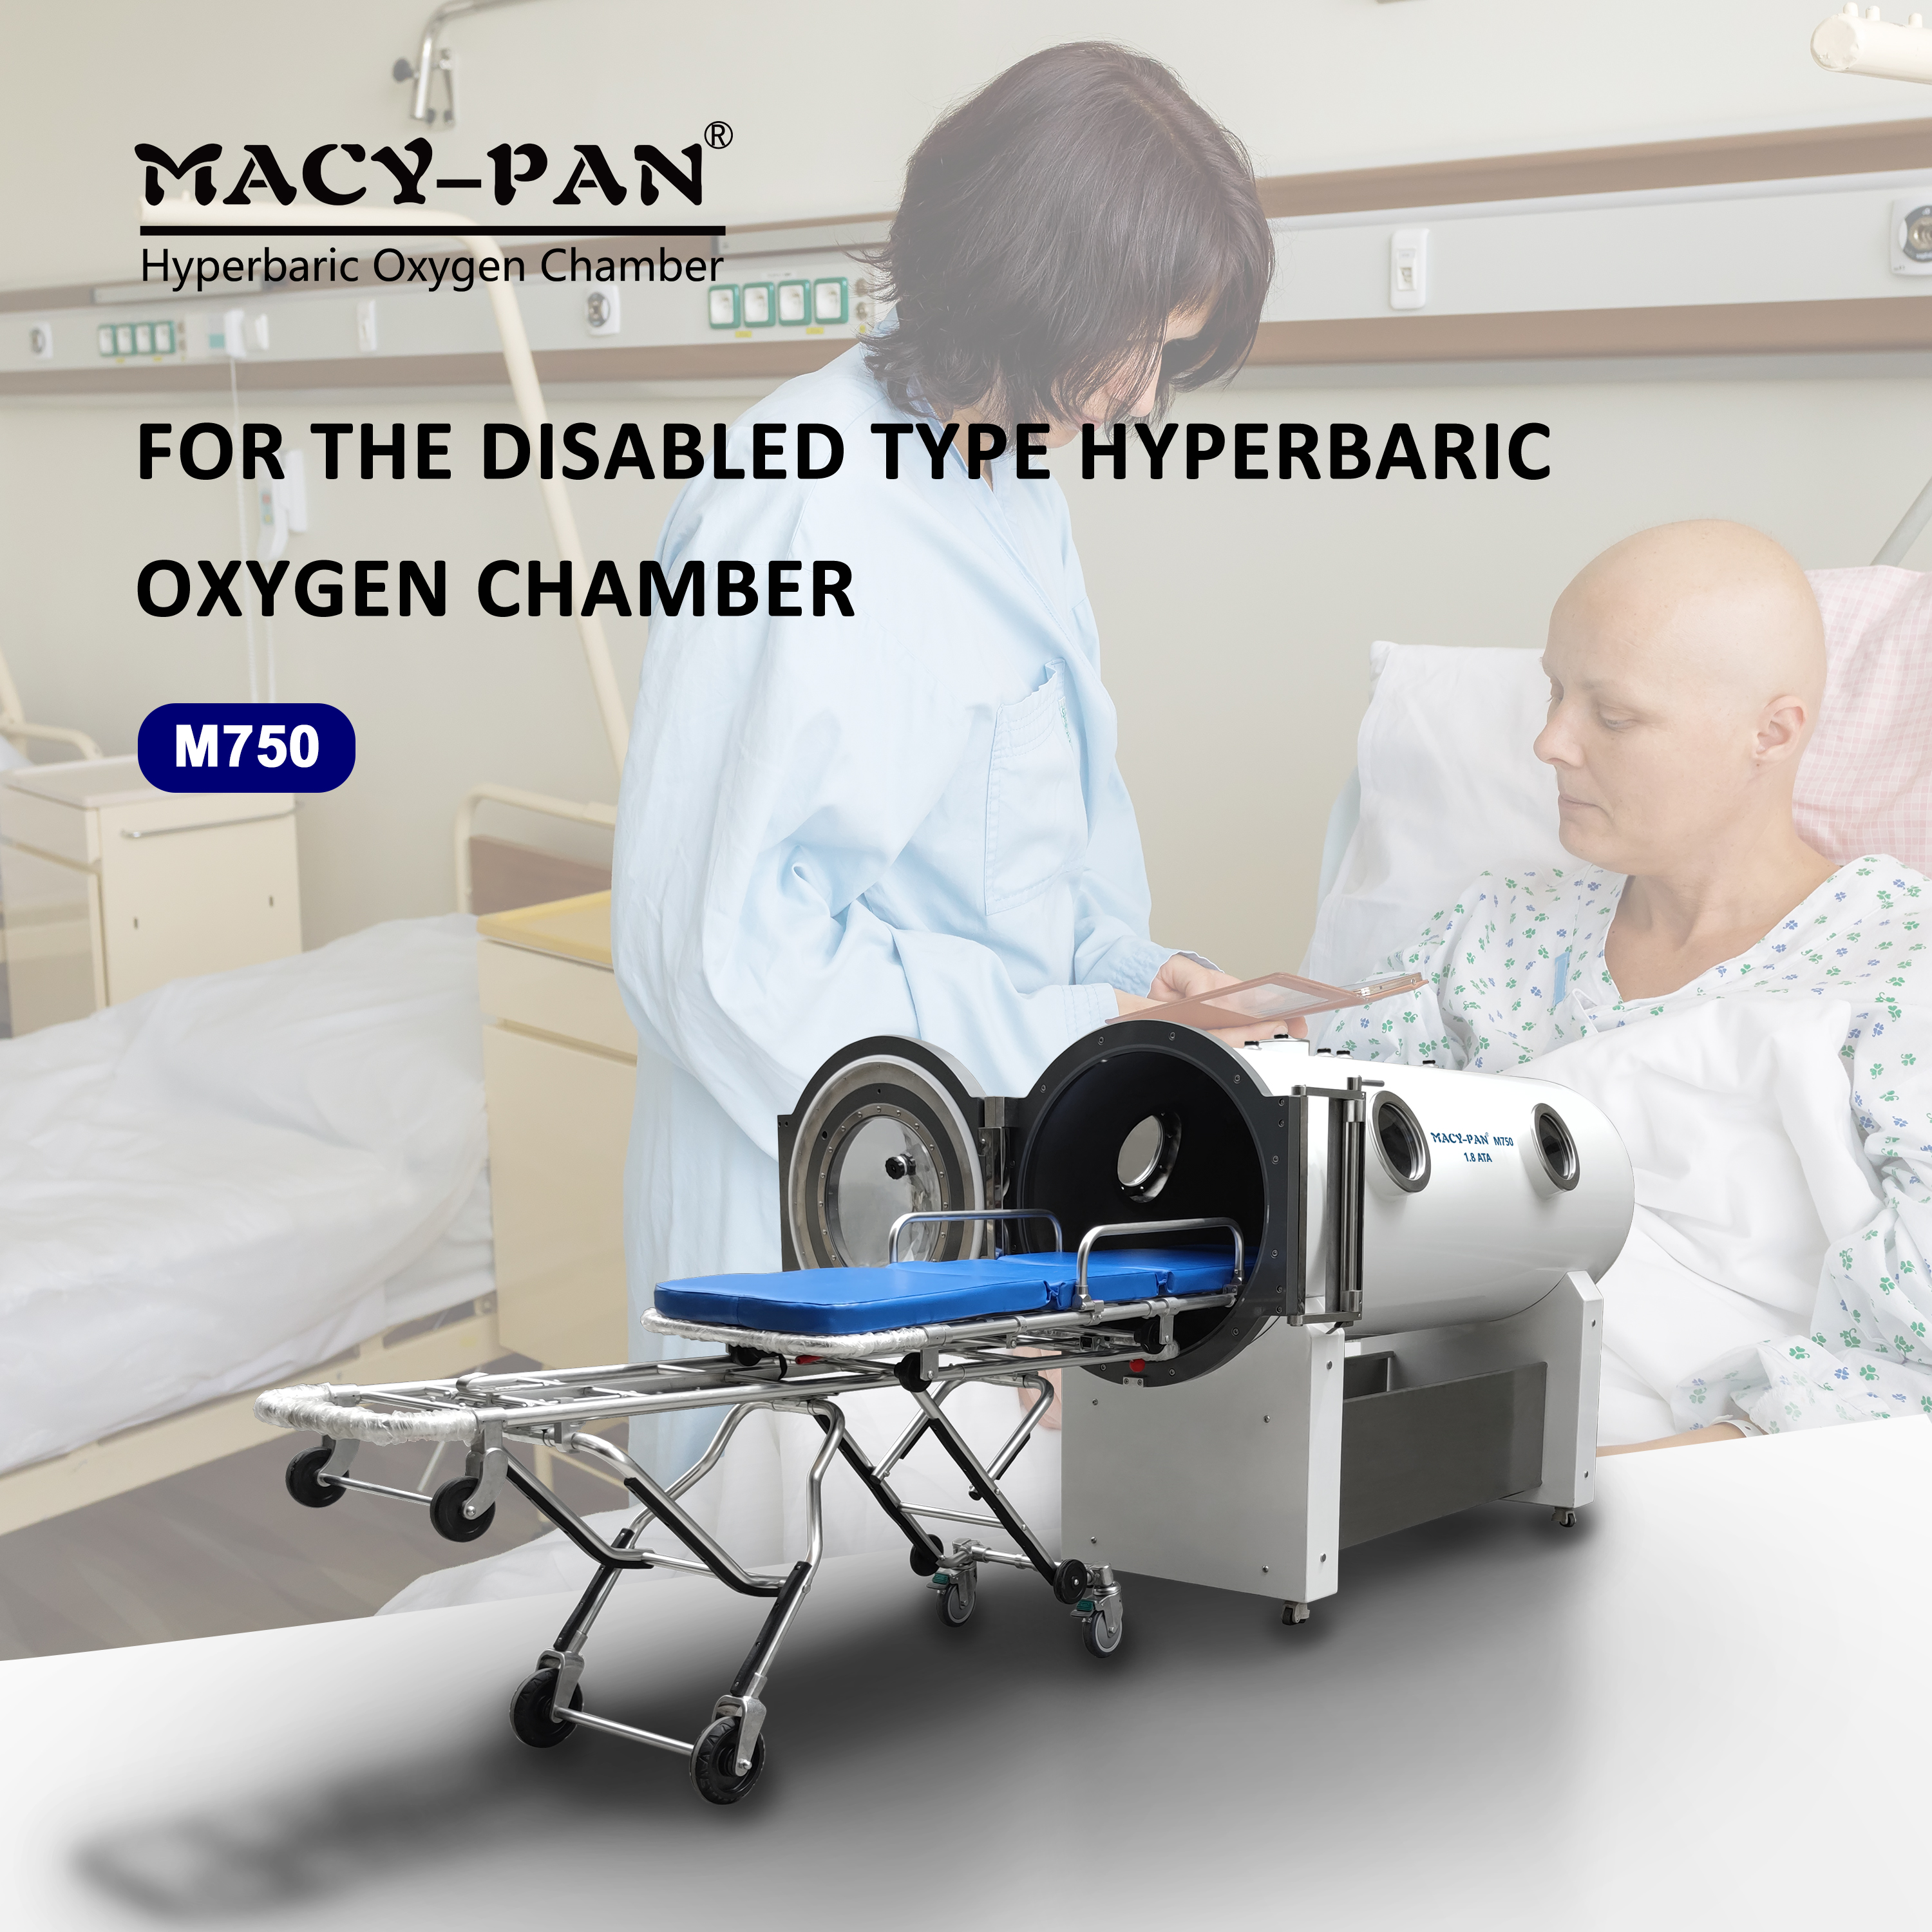 Hyperbaric Oxygen Therapy Treatment for Neurological Disorders